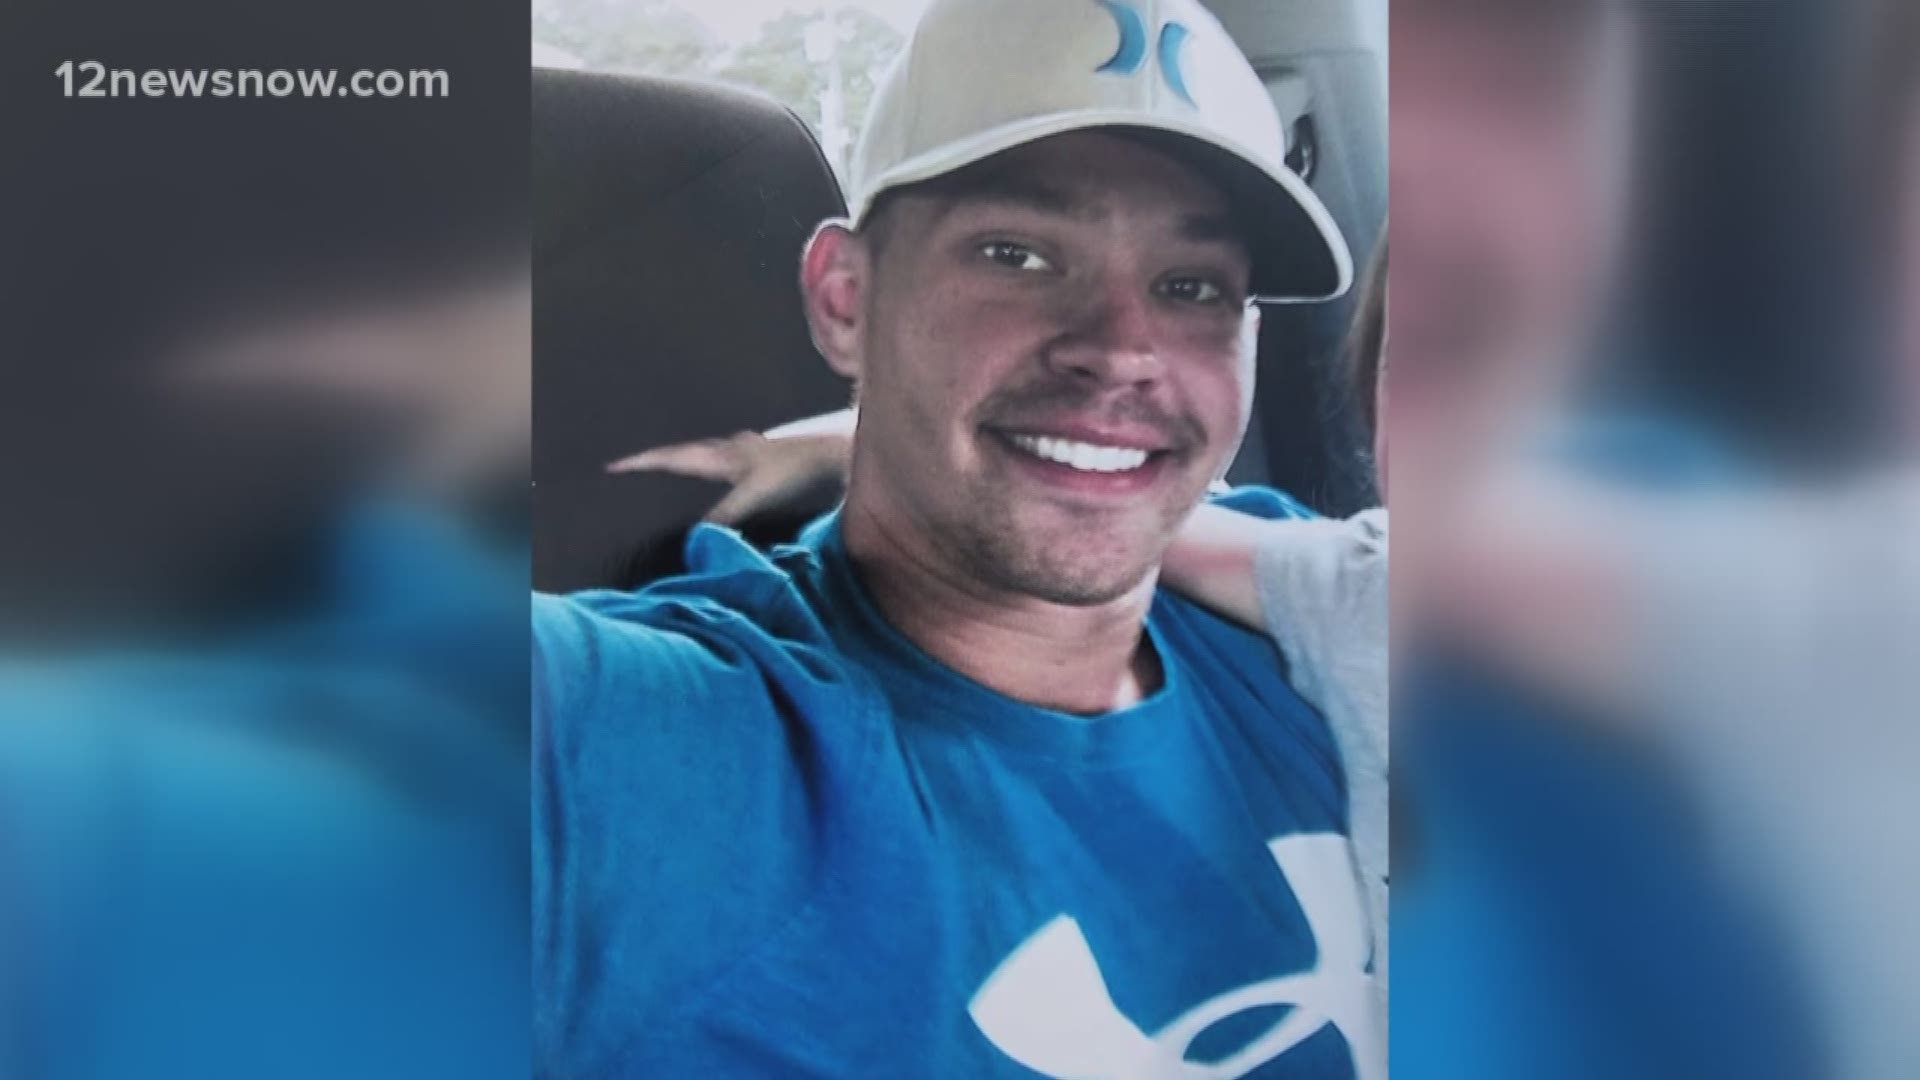 They tell us his car was found late Thursday near Lumberton.